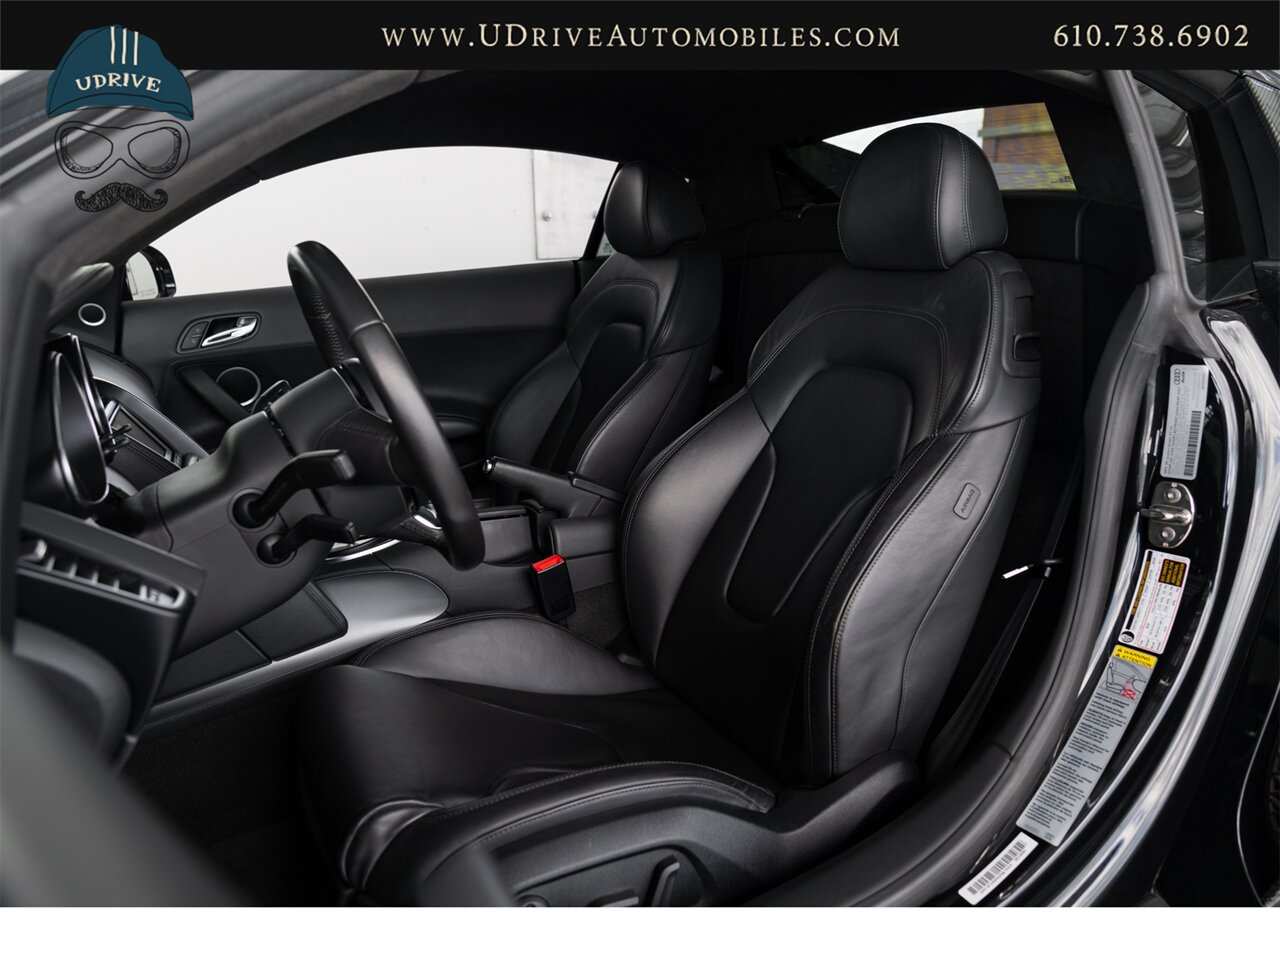 2011 Audi R8 5.2 Quattro  V10 6 Speed Manual - Photo 29 - West Chester, PA 19382